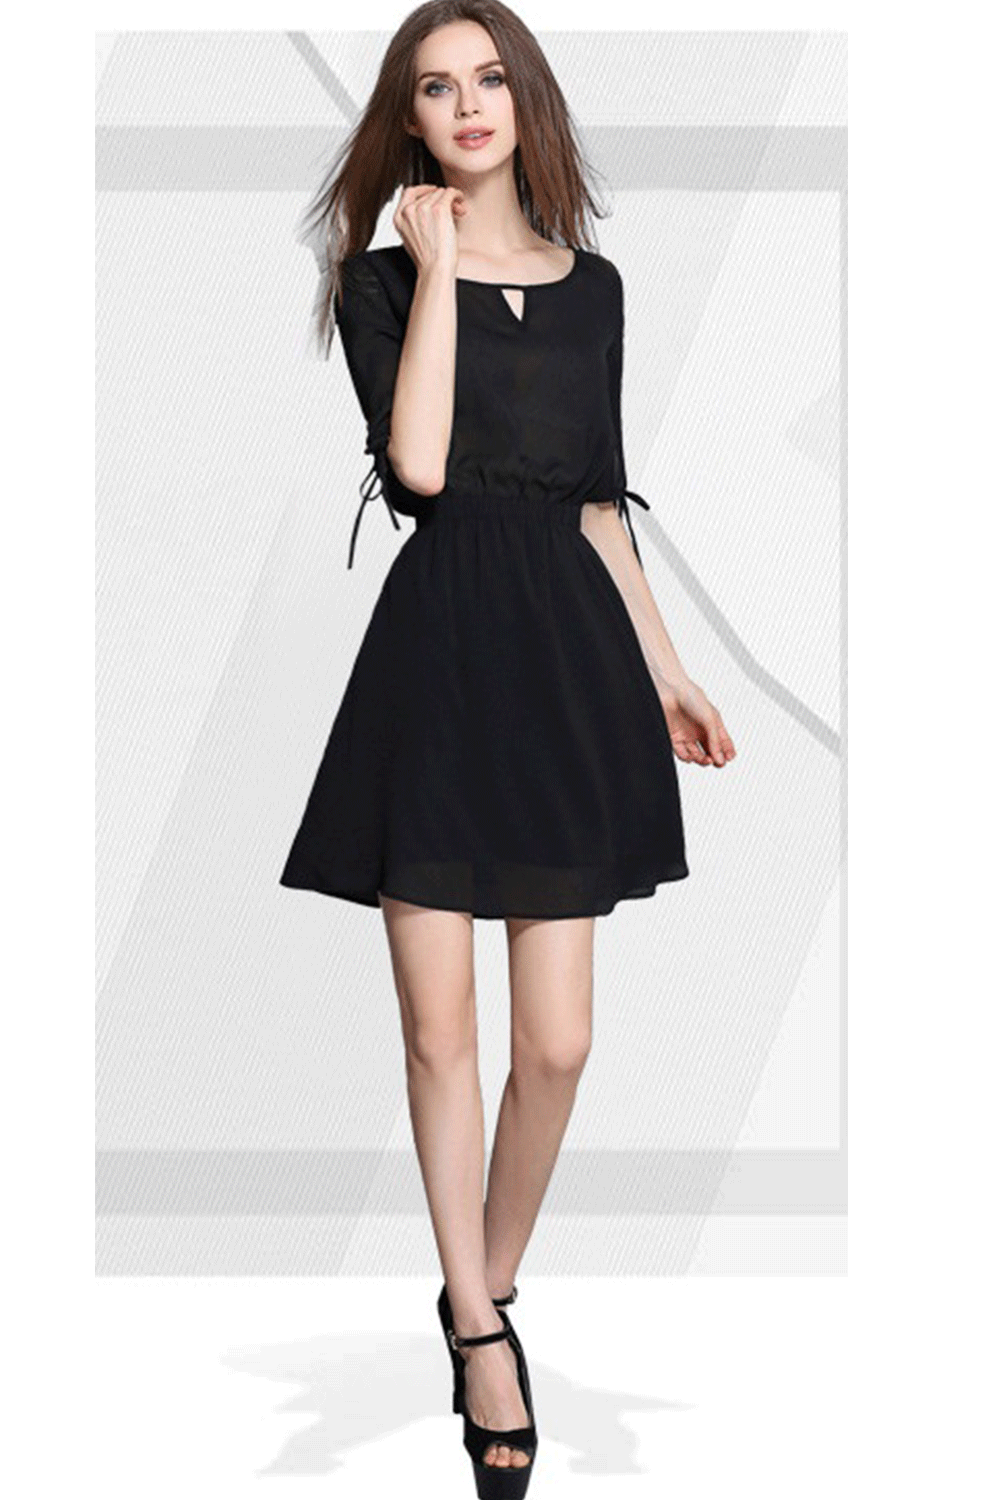 Ketty More Women Chic Solid Color Keyhole Neck Tie Sleeve Dress-KMWD438